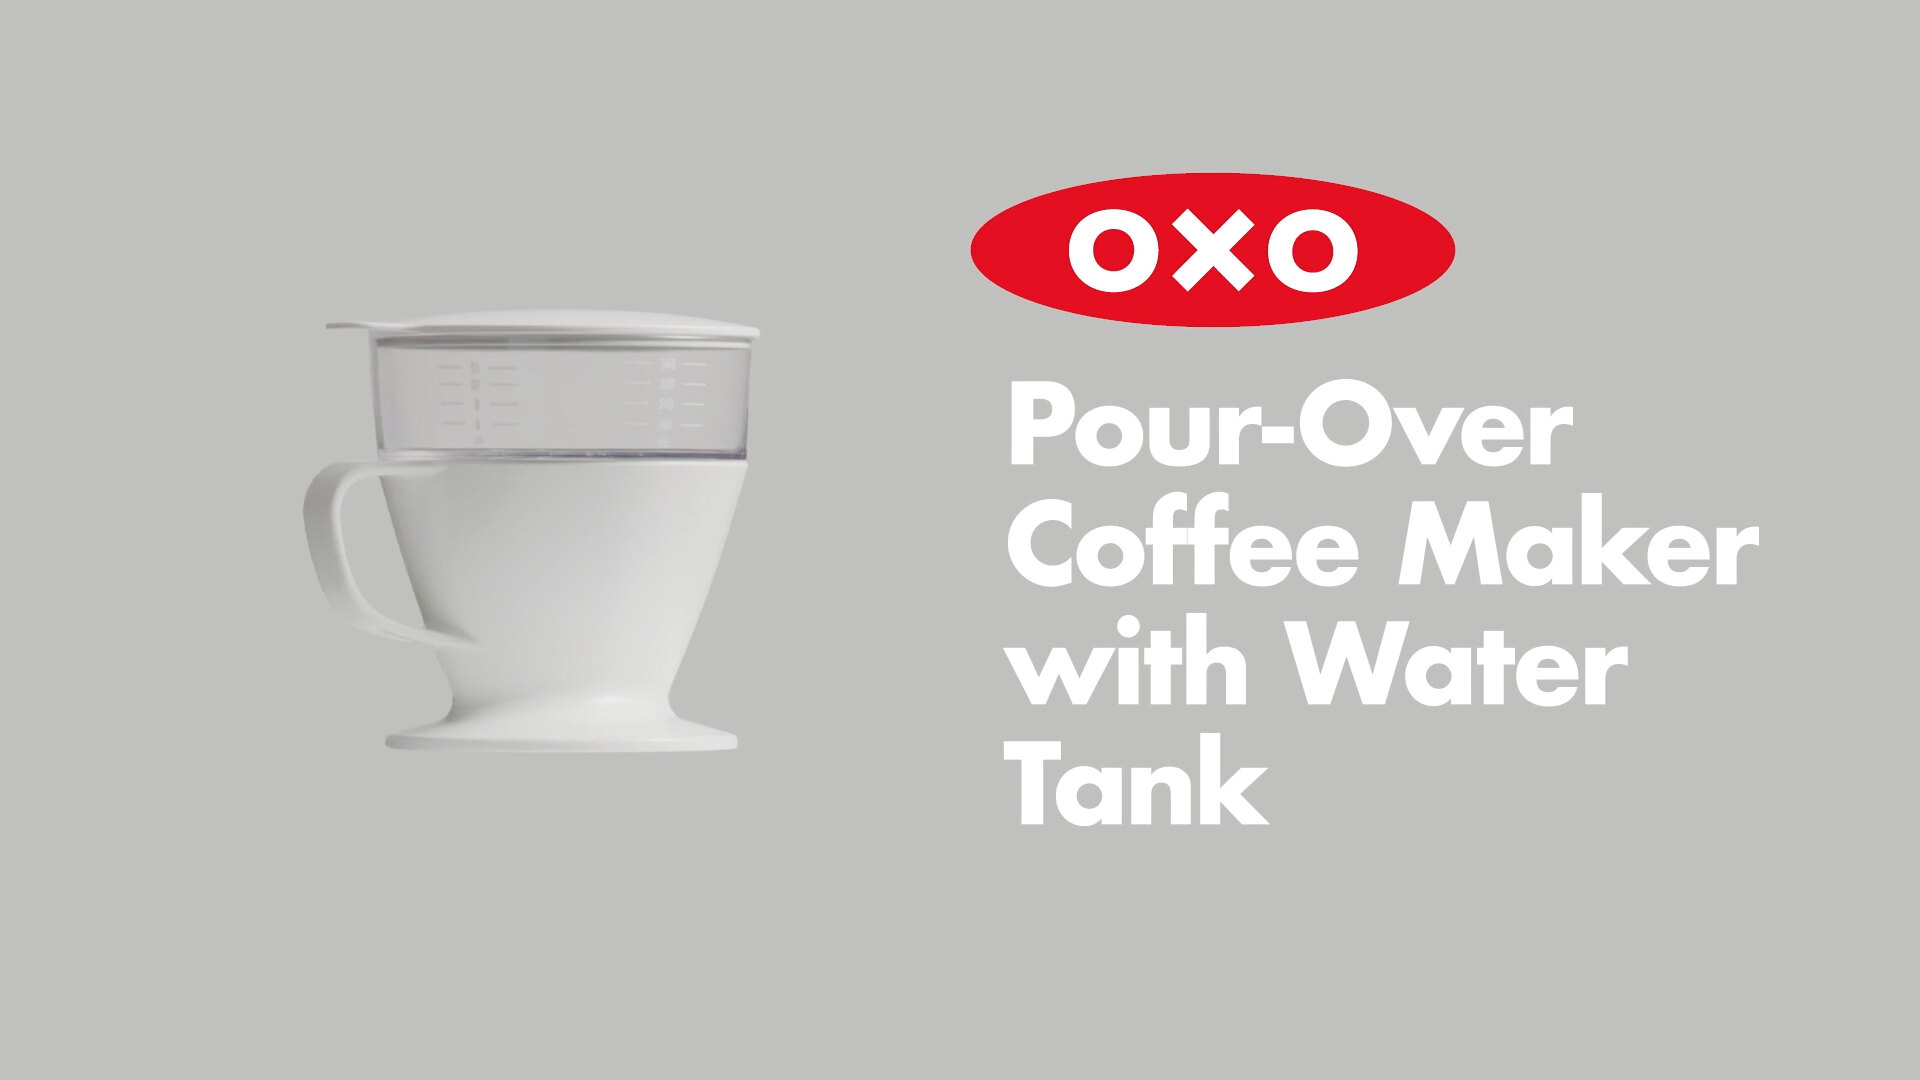 OXO Pour-Over Coffee Maker with Water Tank Video